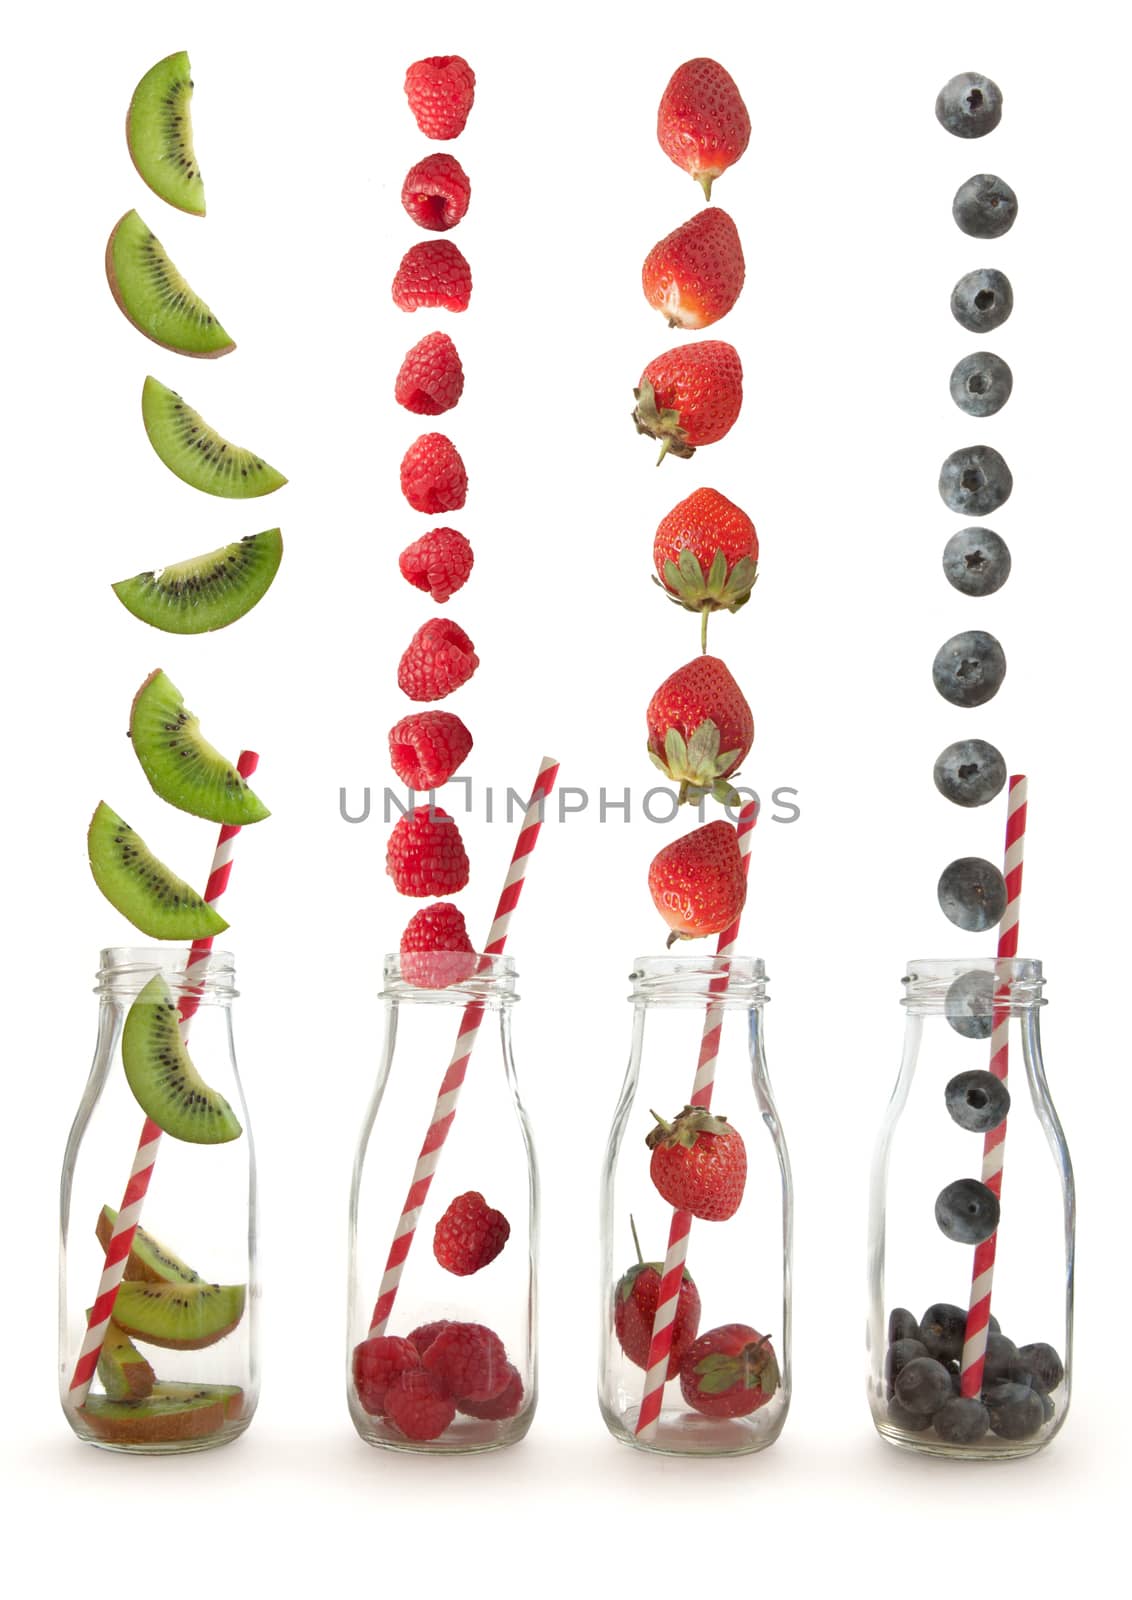 Fruit smoothie making concept by unikpix